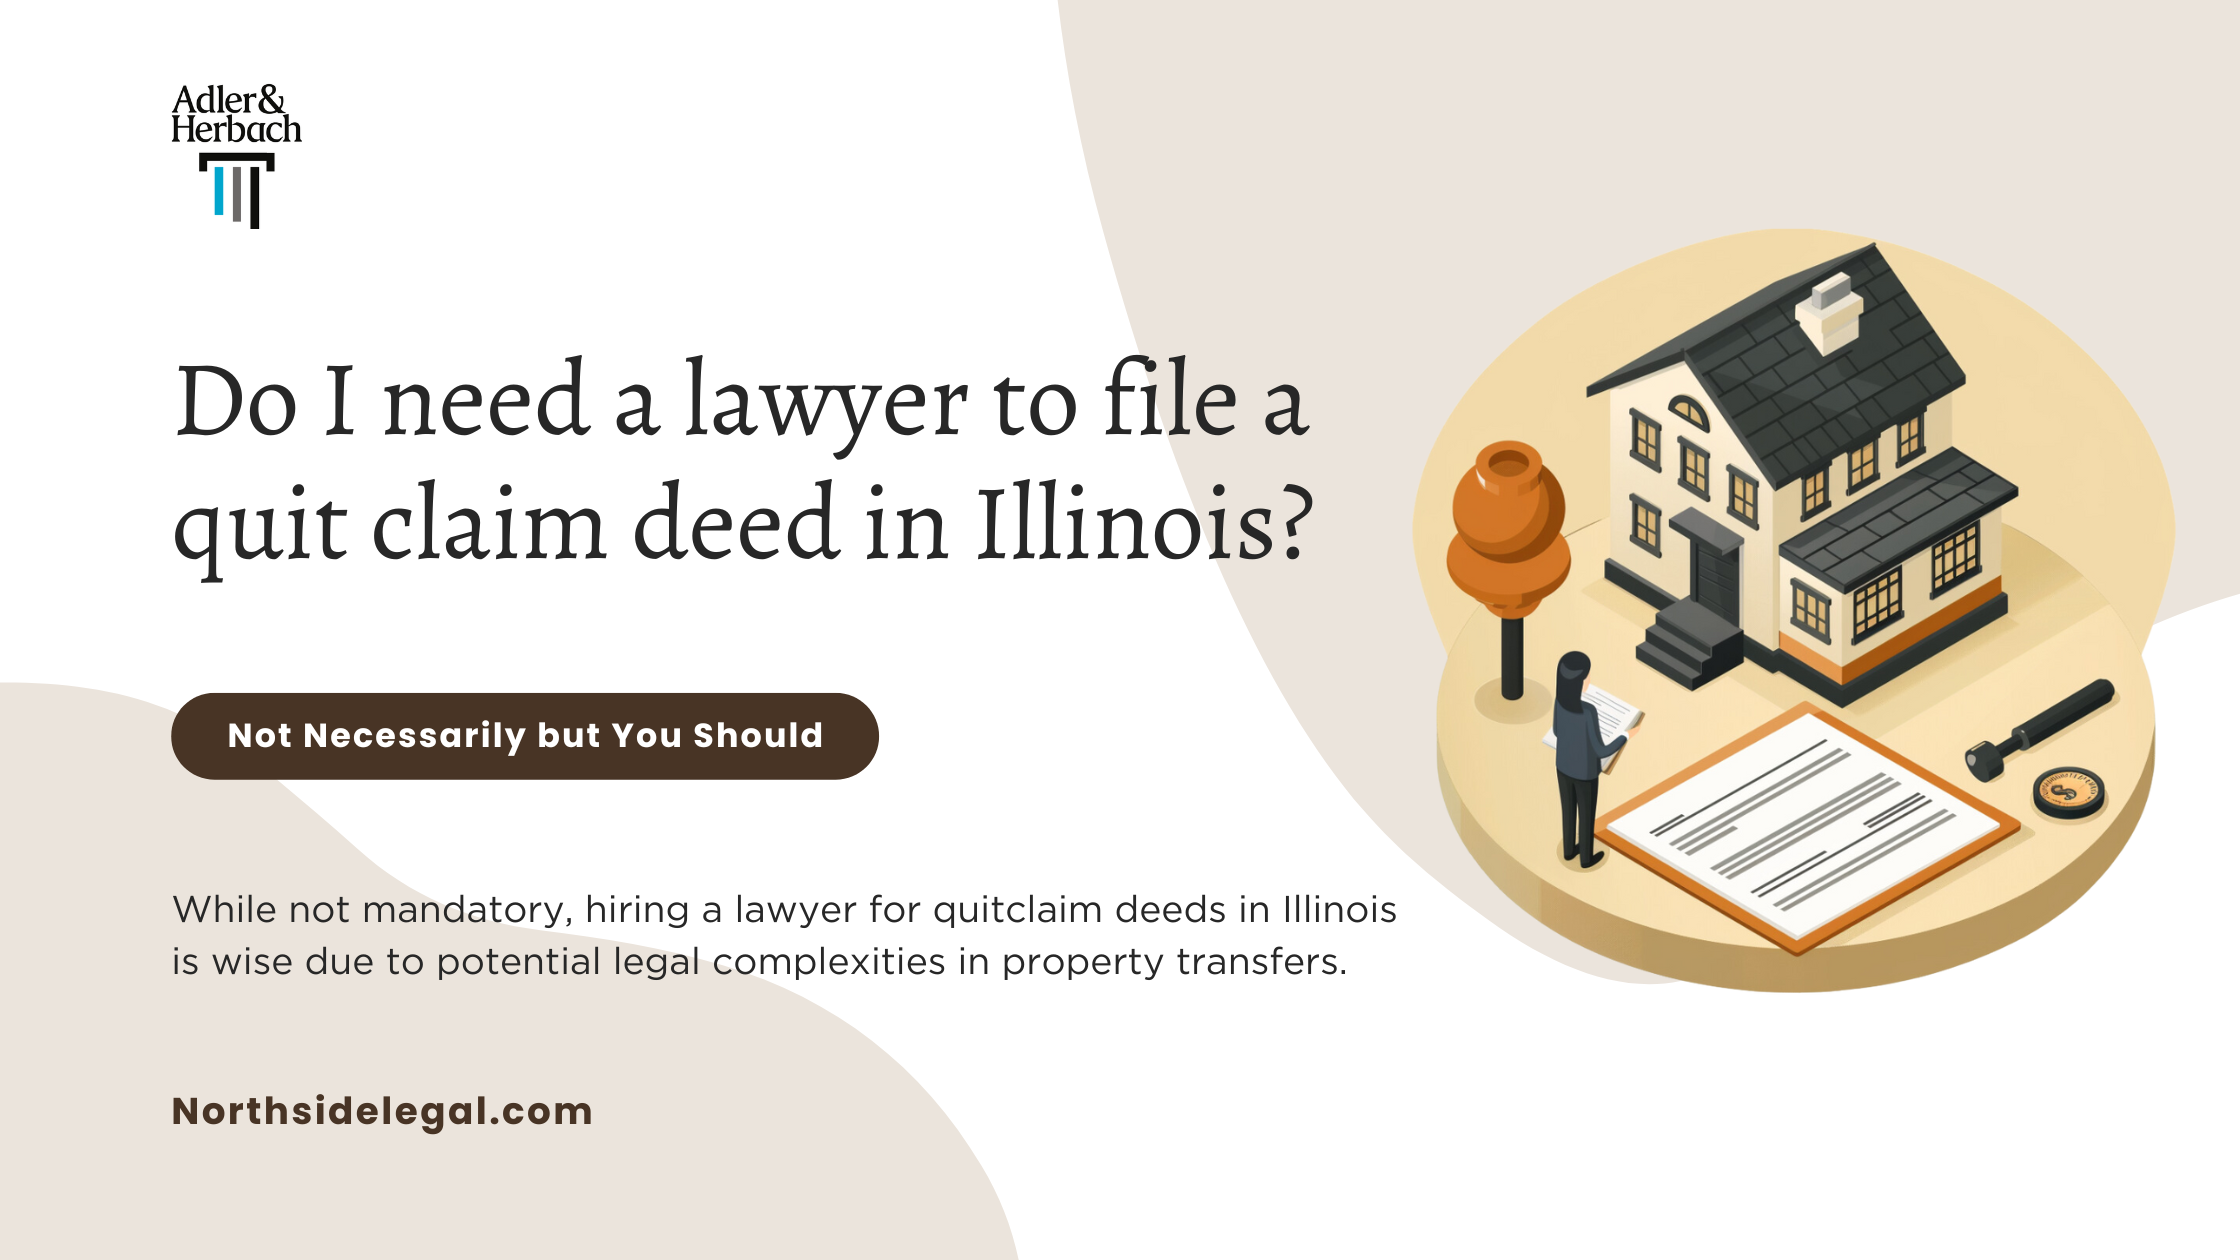 Do I need a lawyer to file a quit claim deed in Illinois?